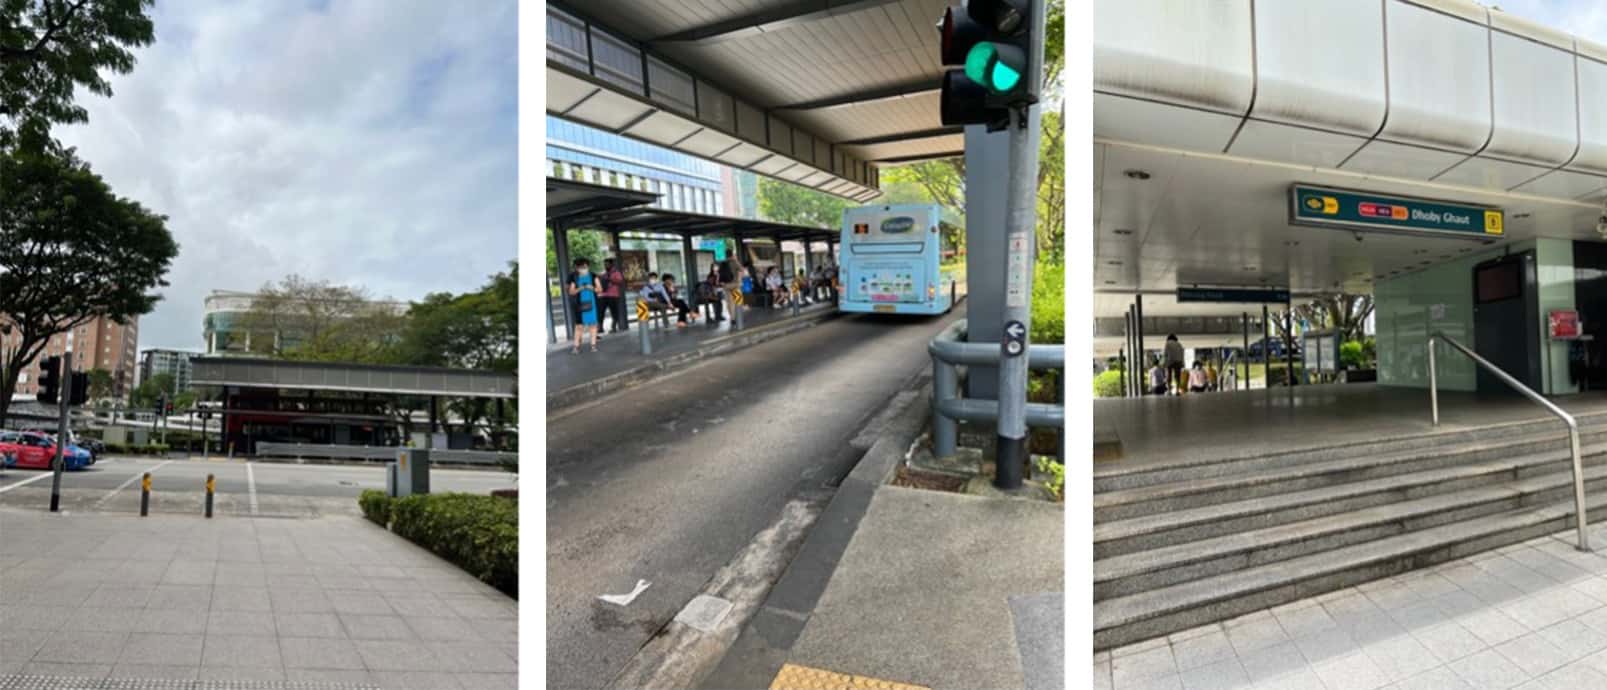 Bus stop and MRT station